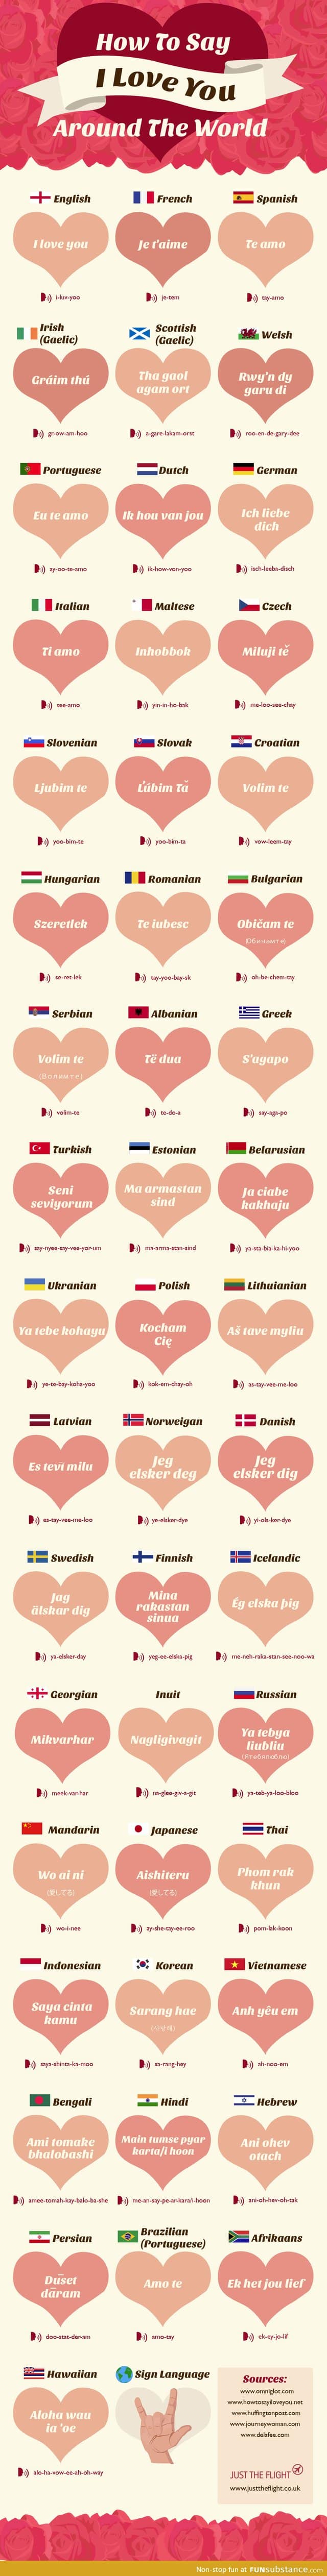 How To Say ‘I Love You’ Around The World